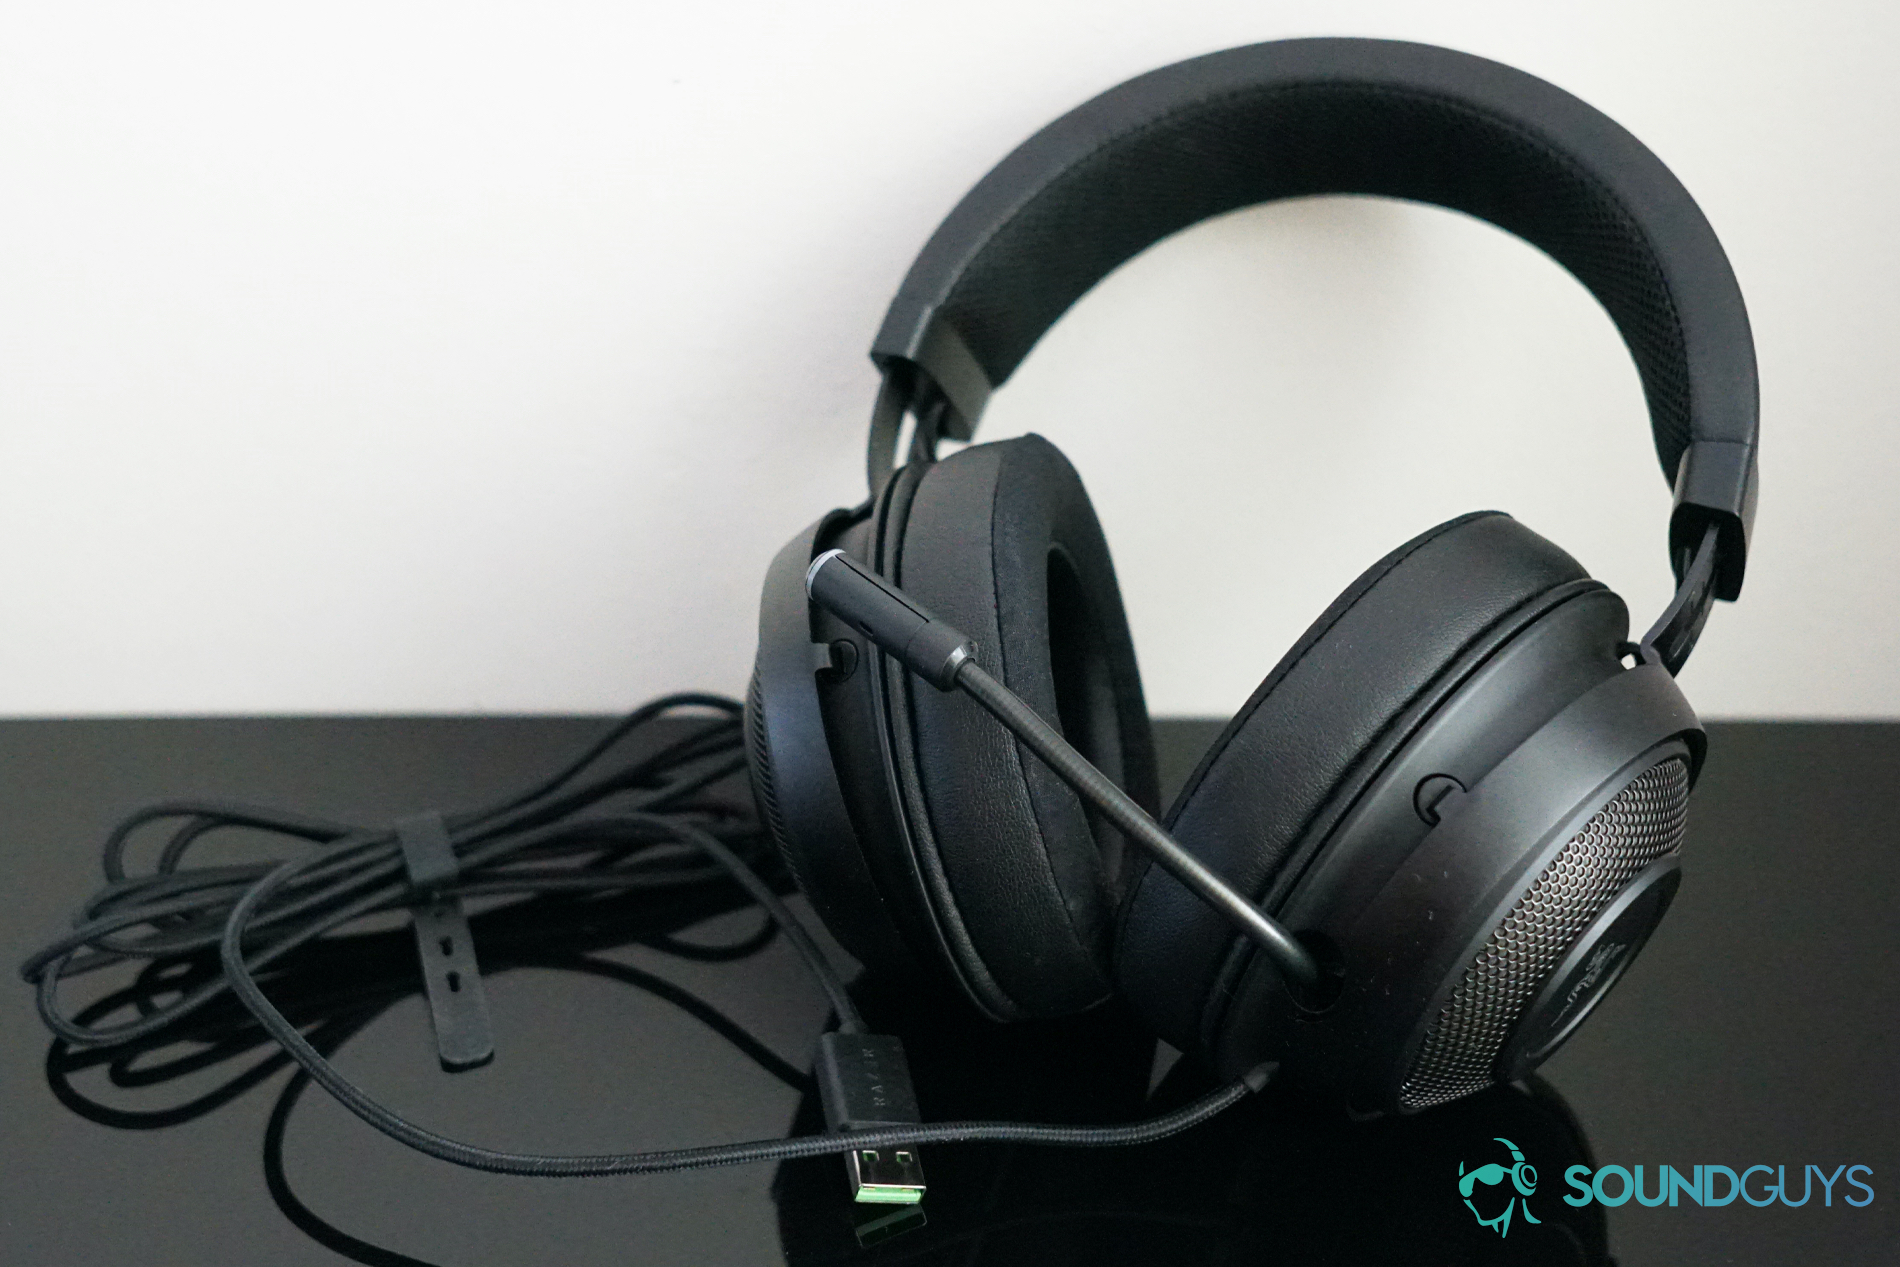 Razer Kraken Ultimate – USB Gaming Headset (Gaming Headphones for PC, PS4  and Switch Dock with Surround Sound, ANC Microphone and RGB Chroma)